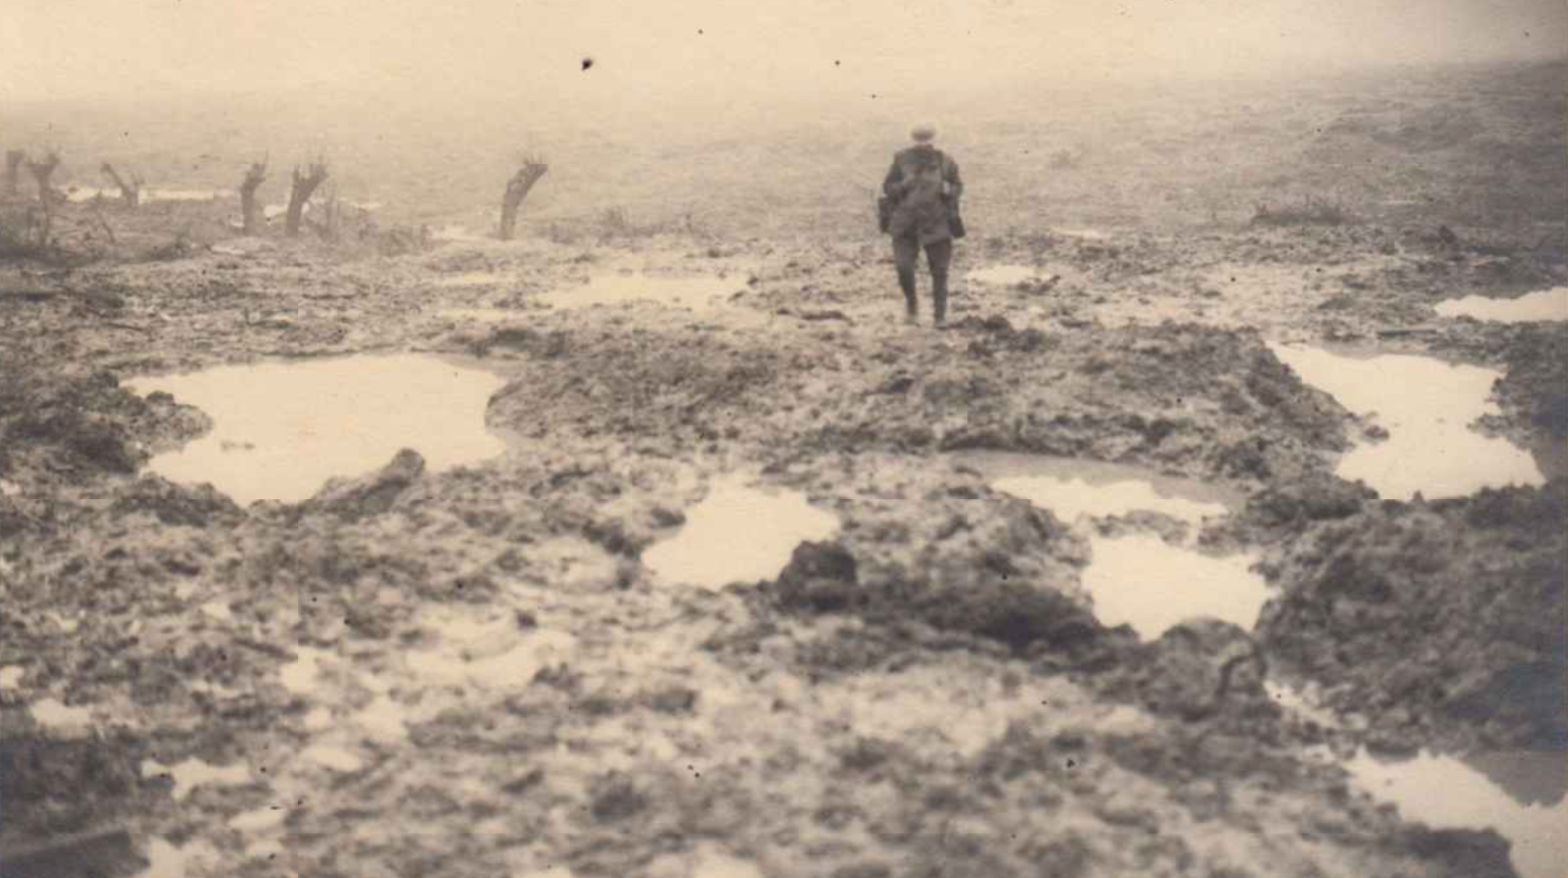 A Canadian soldier at Passchendaele, highlighting the deplorable conditions during the battle.  (Image: Canadian Great War Centre)